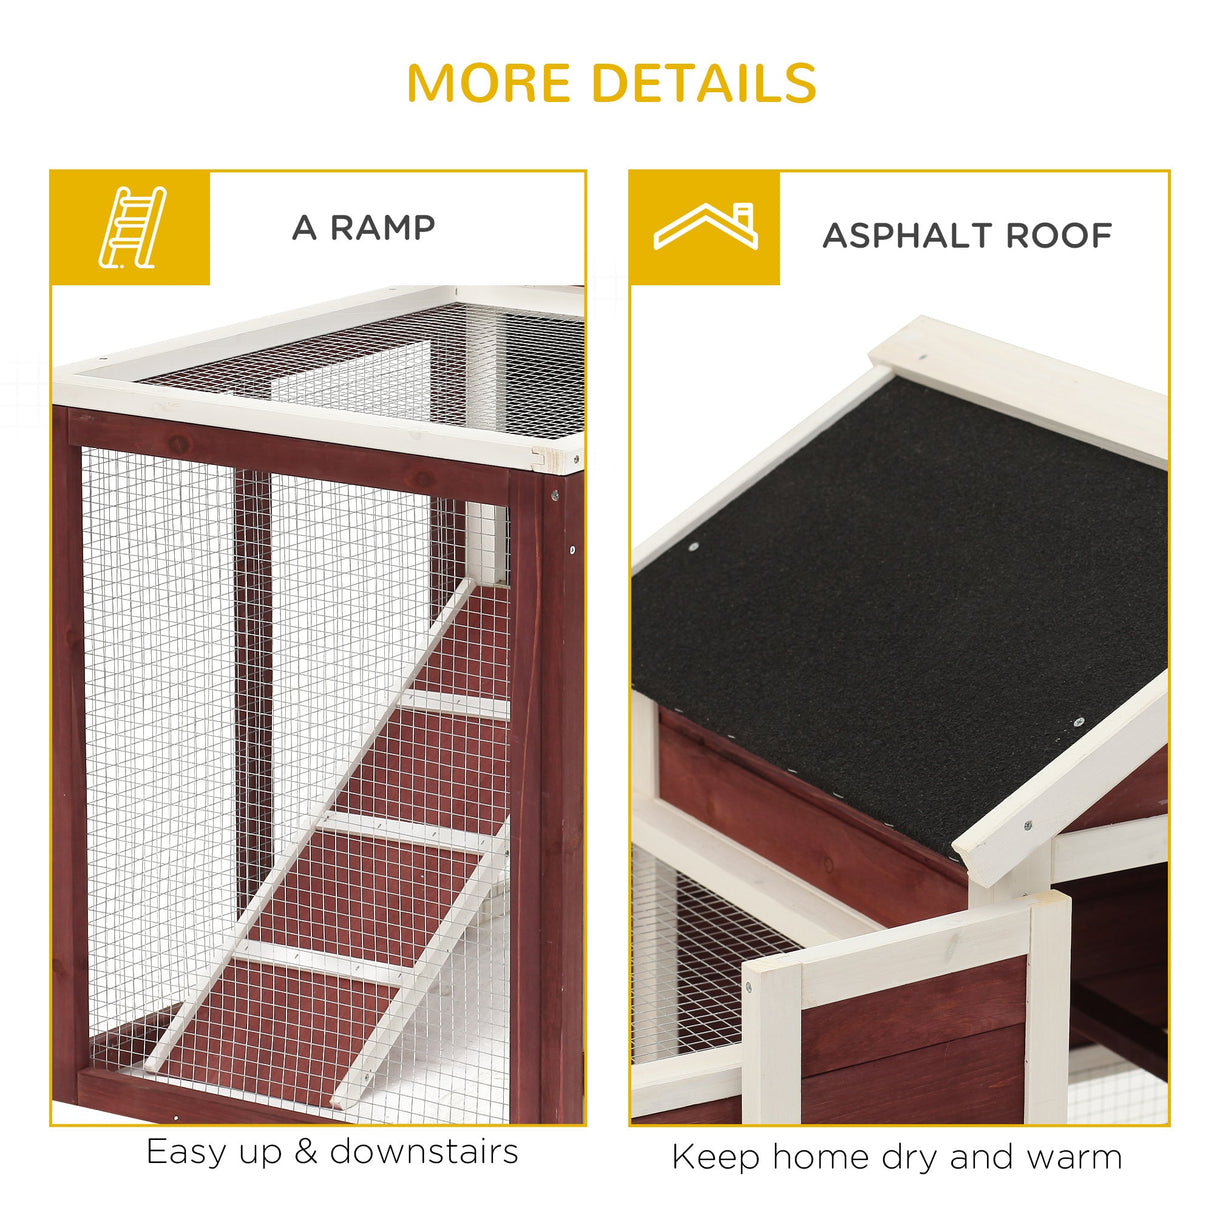 2 Tiers Rabbit Hutch and Run Wooden Guinea Pig Hutch Outdoor with Sliding Tray, Ramp, 122 x 62.6 x 92cm, PawHut, Brown